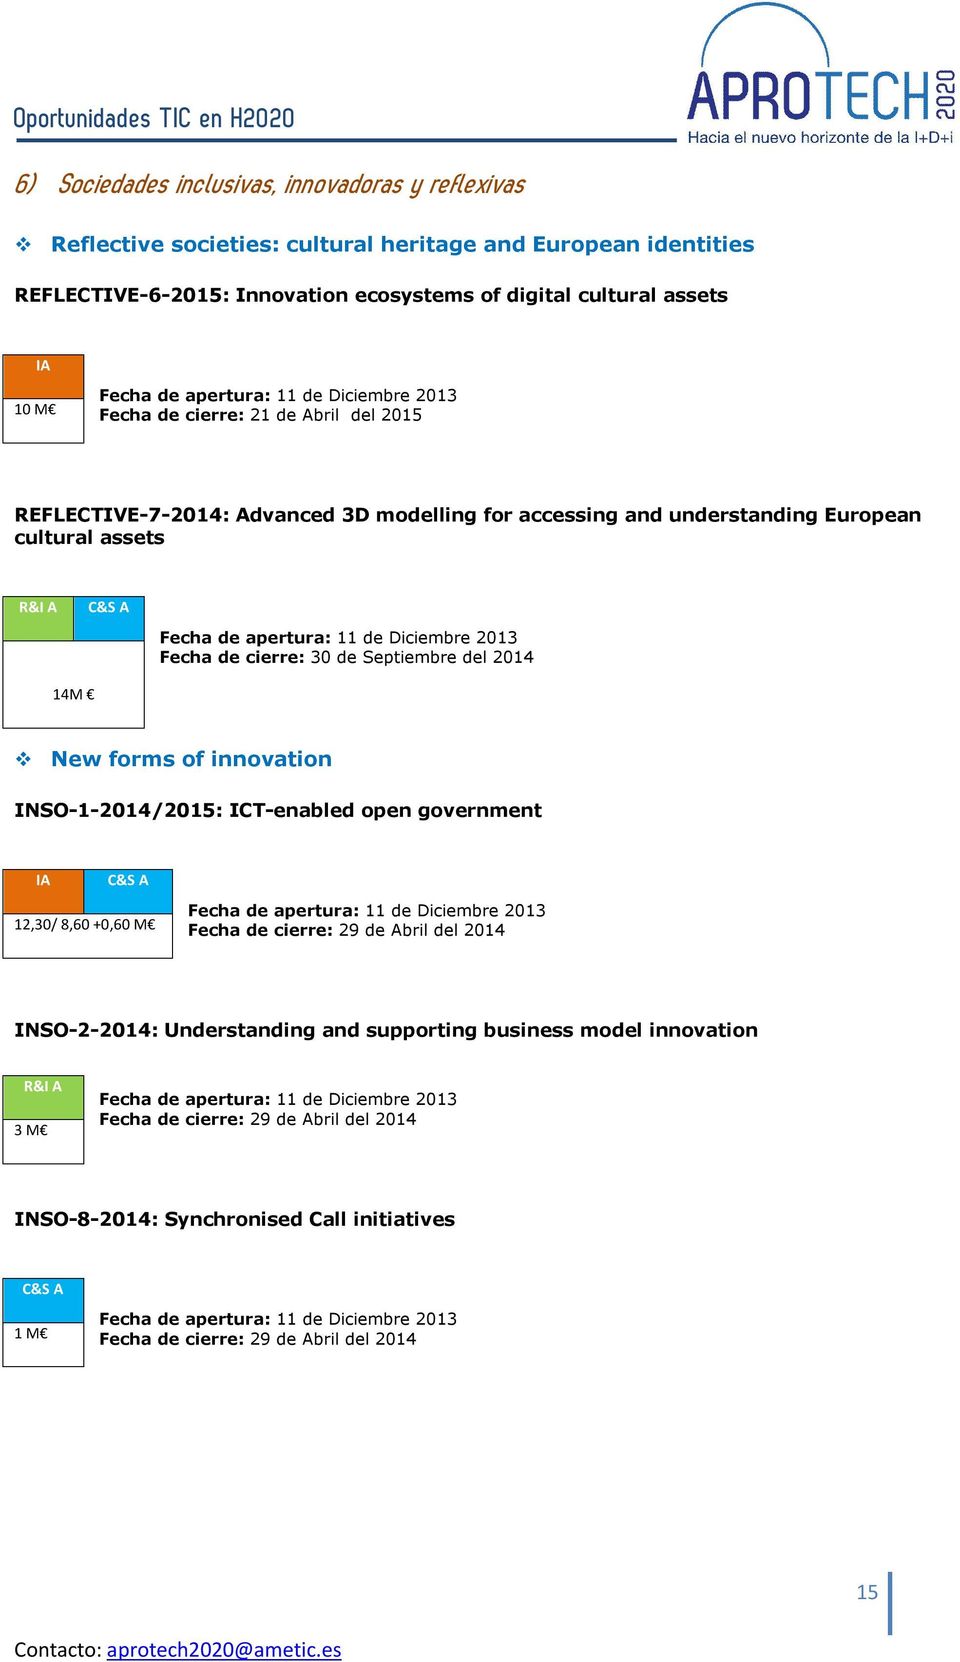 2014 14M New forms of innovation INSO-1-2014/2015: ICT-enabled open government 12,30/ 8,60 +0,60 M Fecha de cierre: 29 de Abril del 2014 INSO-2-2014: Understanding